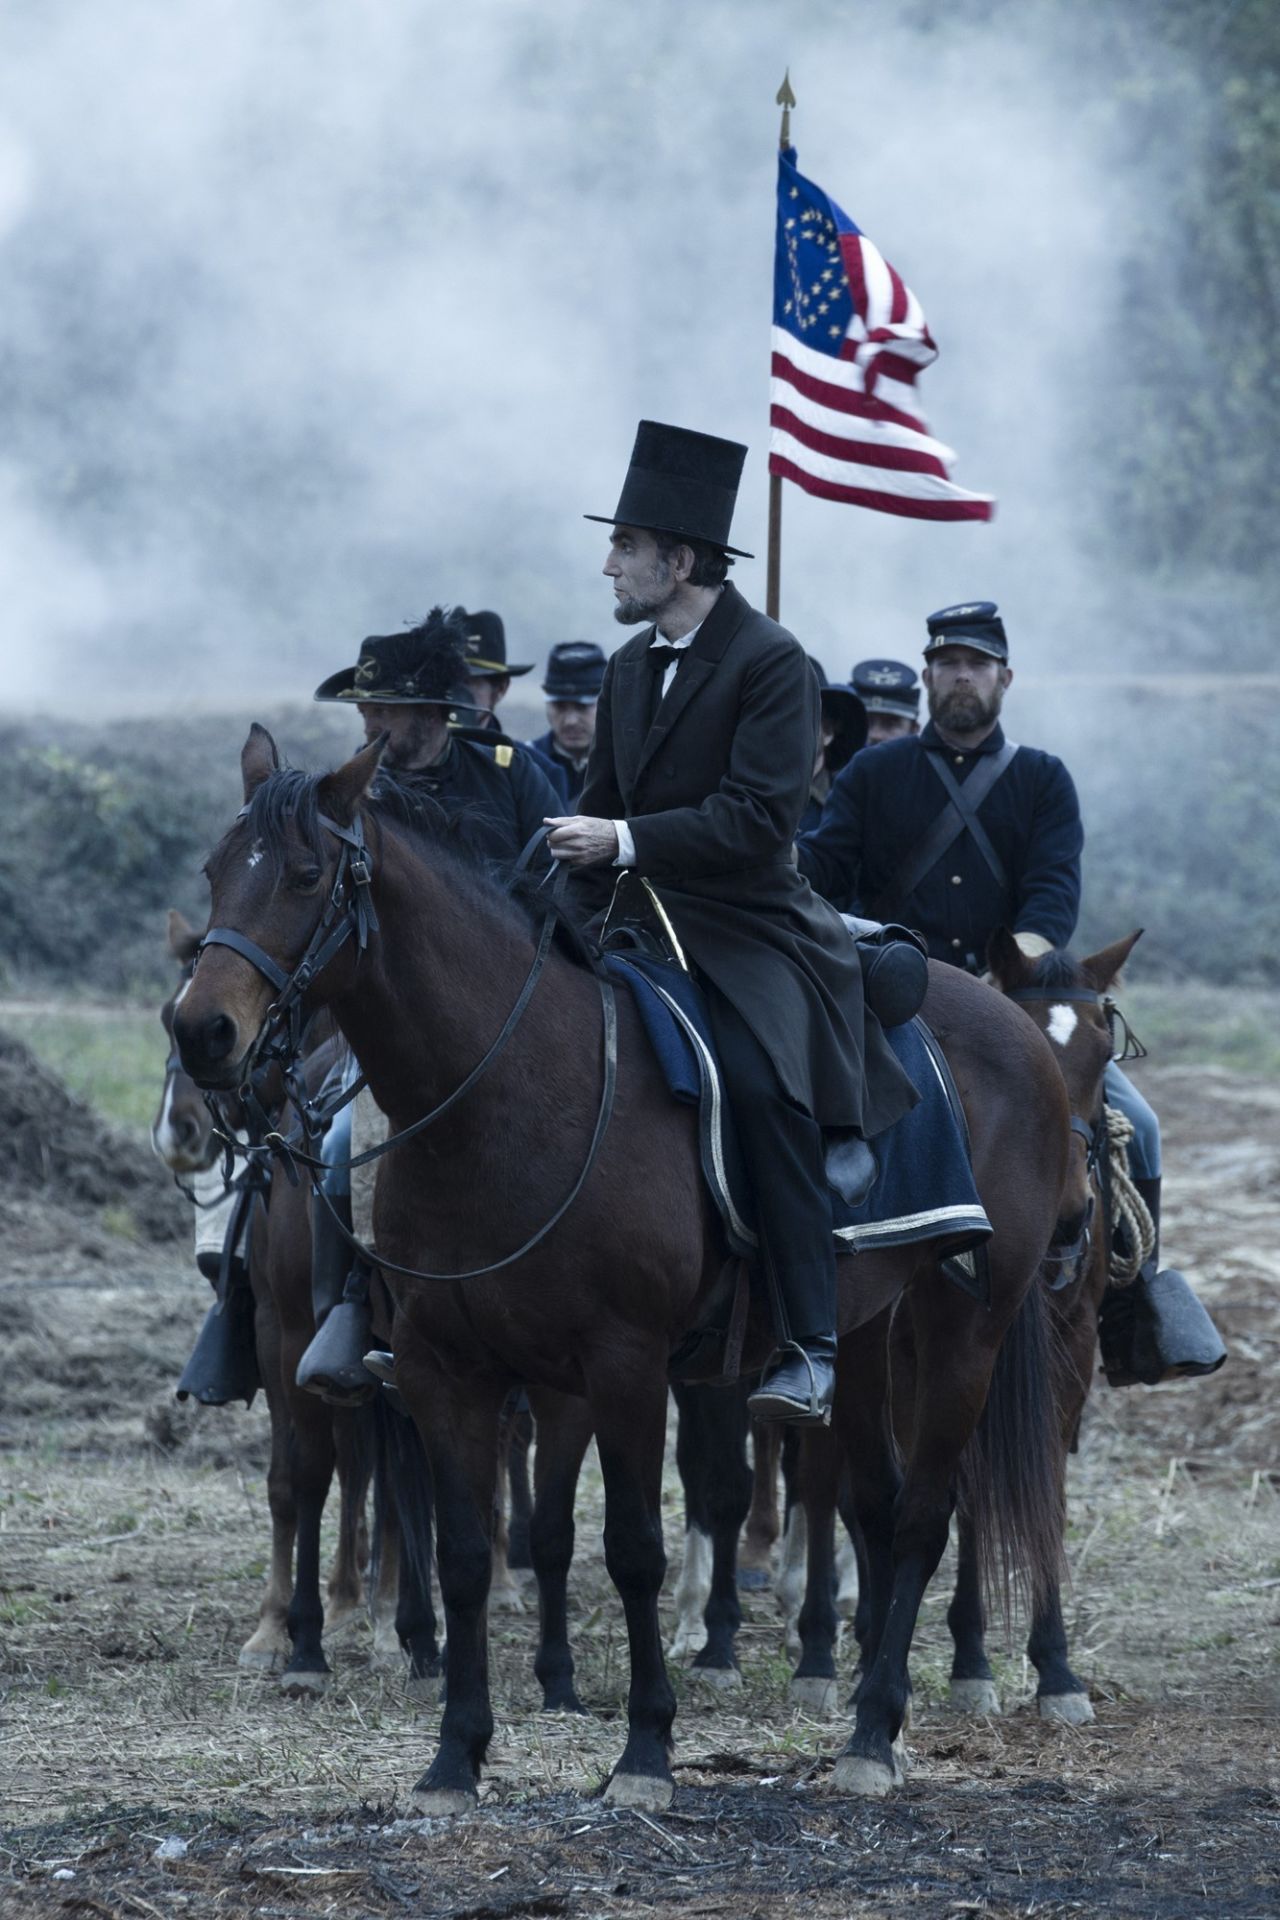 Daniel Day-Lewis won the best actor Academy Award in 2013 for playing the 16th U.S. president in "Lincoln," which also took home the production design Oscar. The Steven Spielberg-directed drama also stars British actor Jared Harris as Ulysses S. Grant.